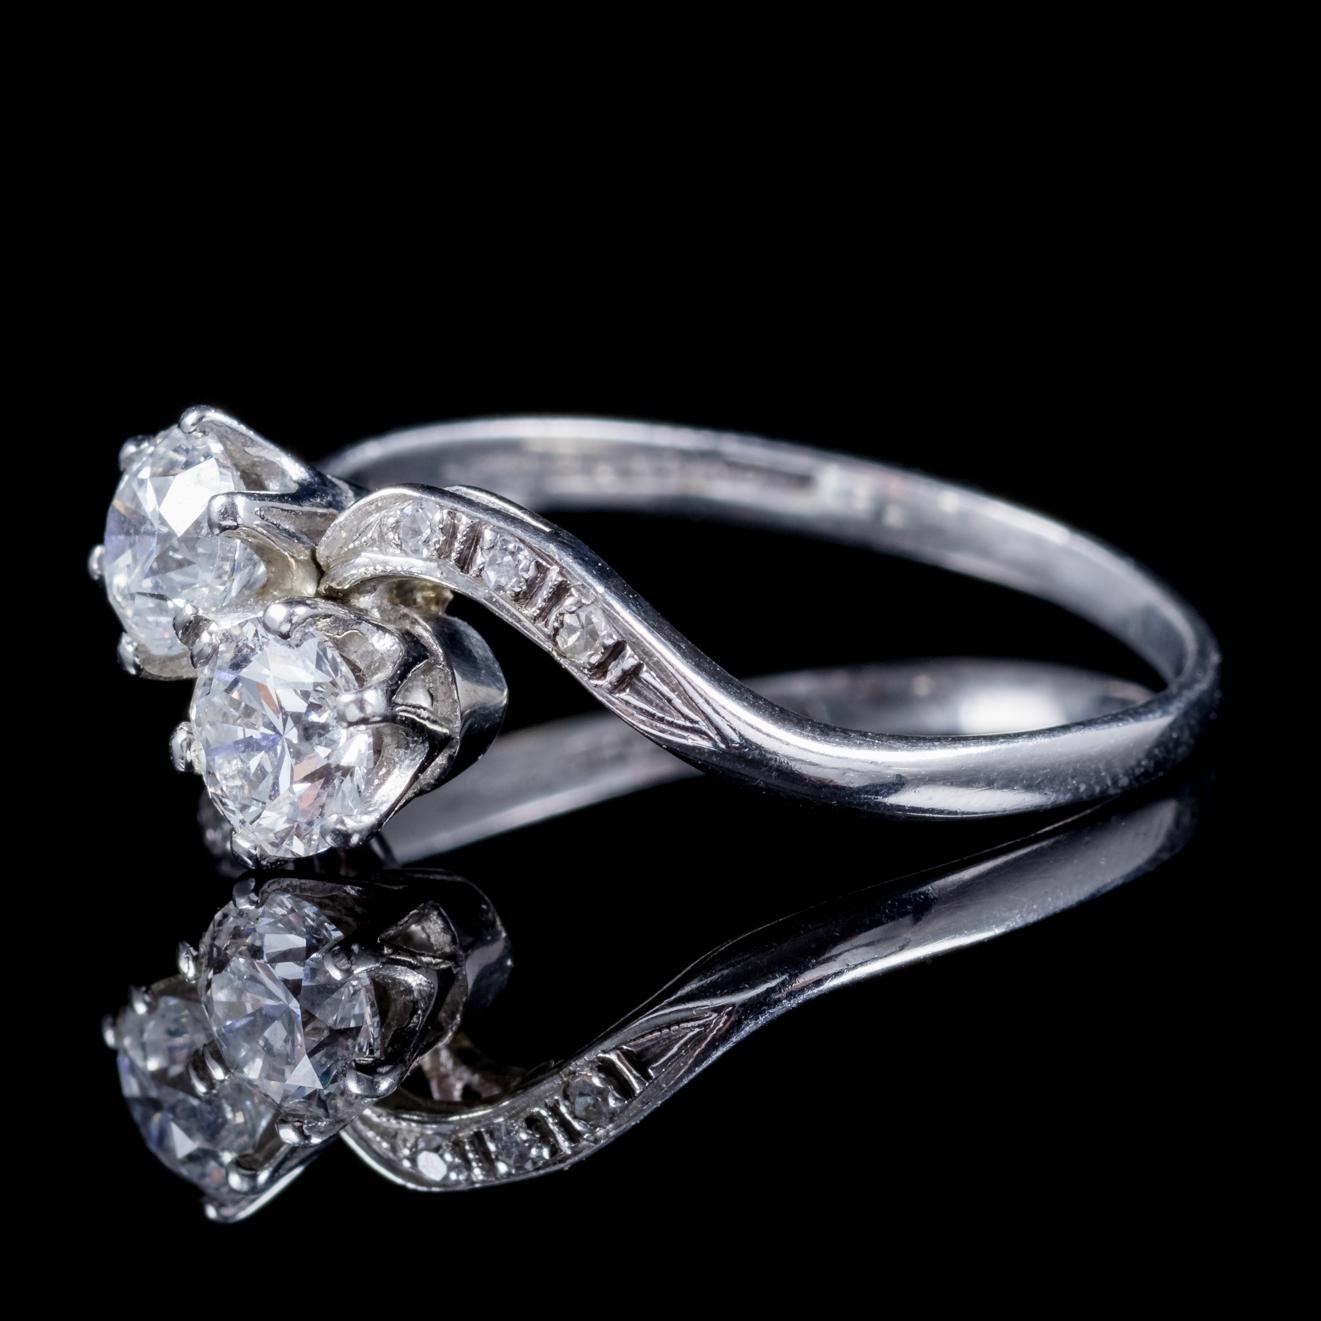 A fabulous antique Edwardian ring Circa 1915, set with two 0.55ct old cut Diamonds with smaller Diamonds chasing down the wonderful twisted gallery.

Old Cut Diamonds are known to Dance by Candle light, beautifully captivating the allure of natures